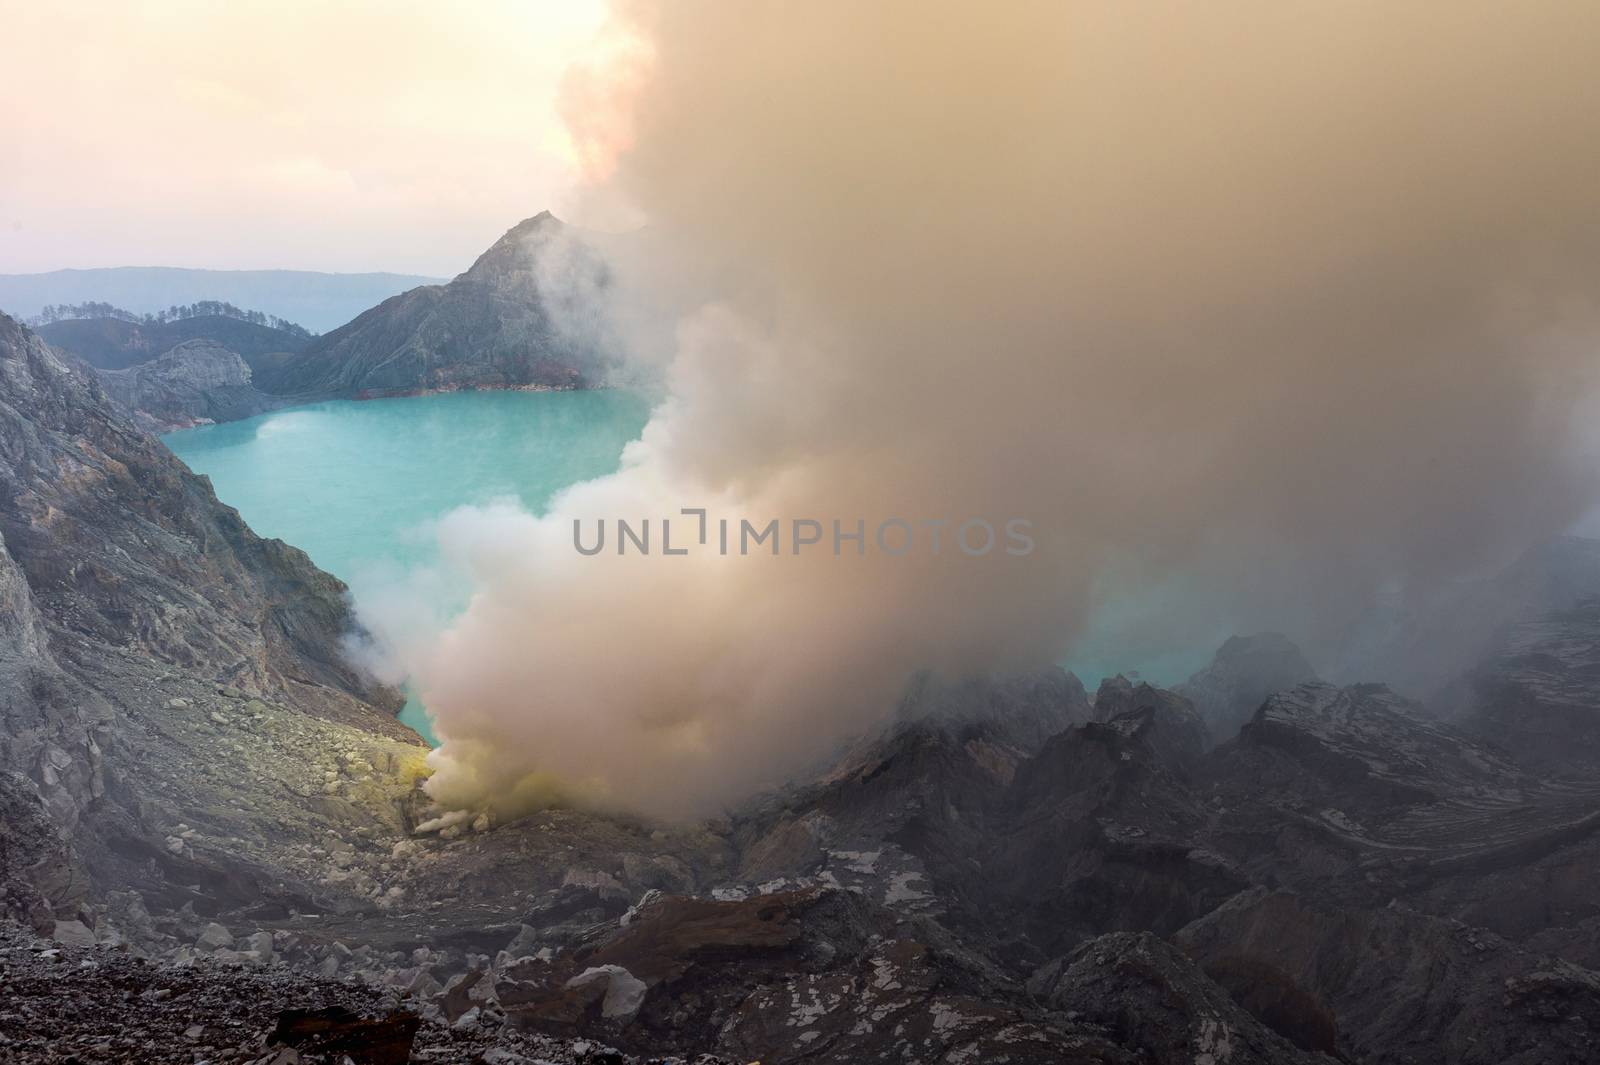 Sulfur fumes from the crater of Kawah Ijen Volcano in Indonesia by gutarphotoghaphy